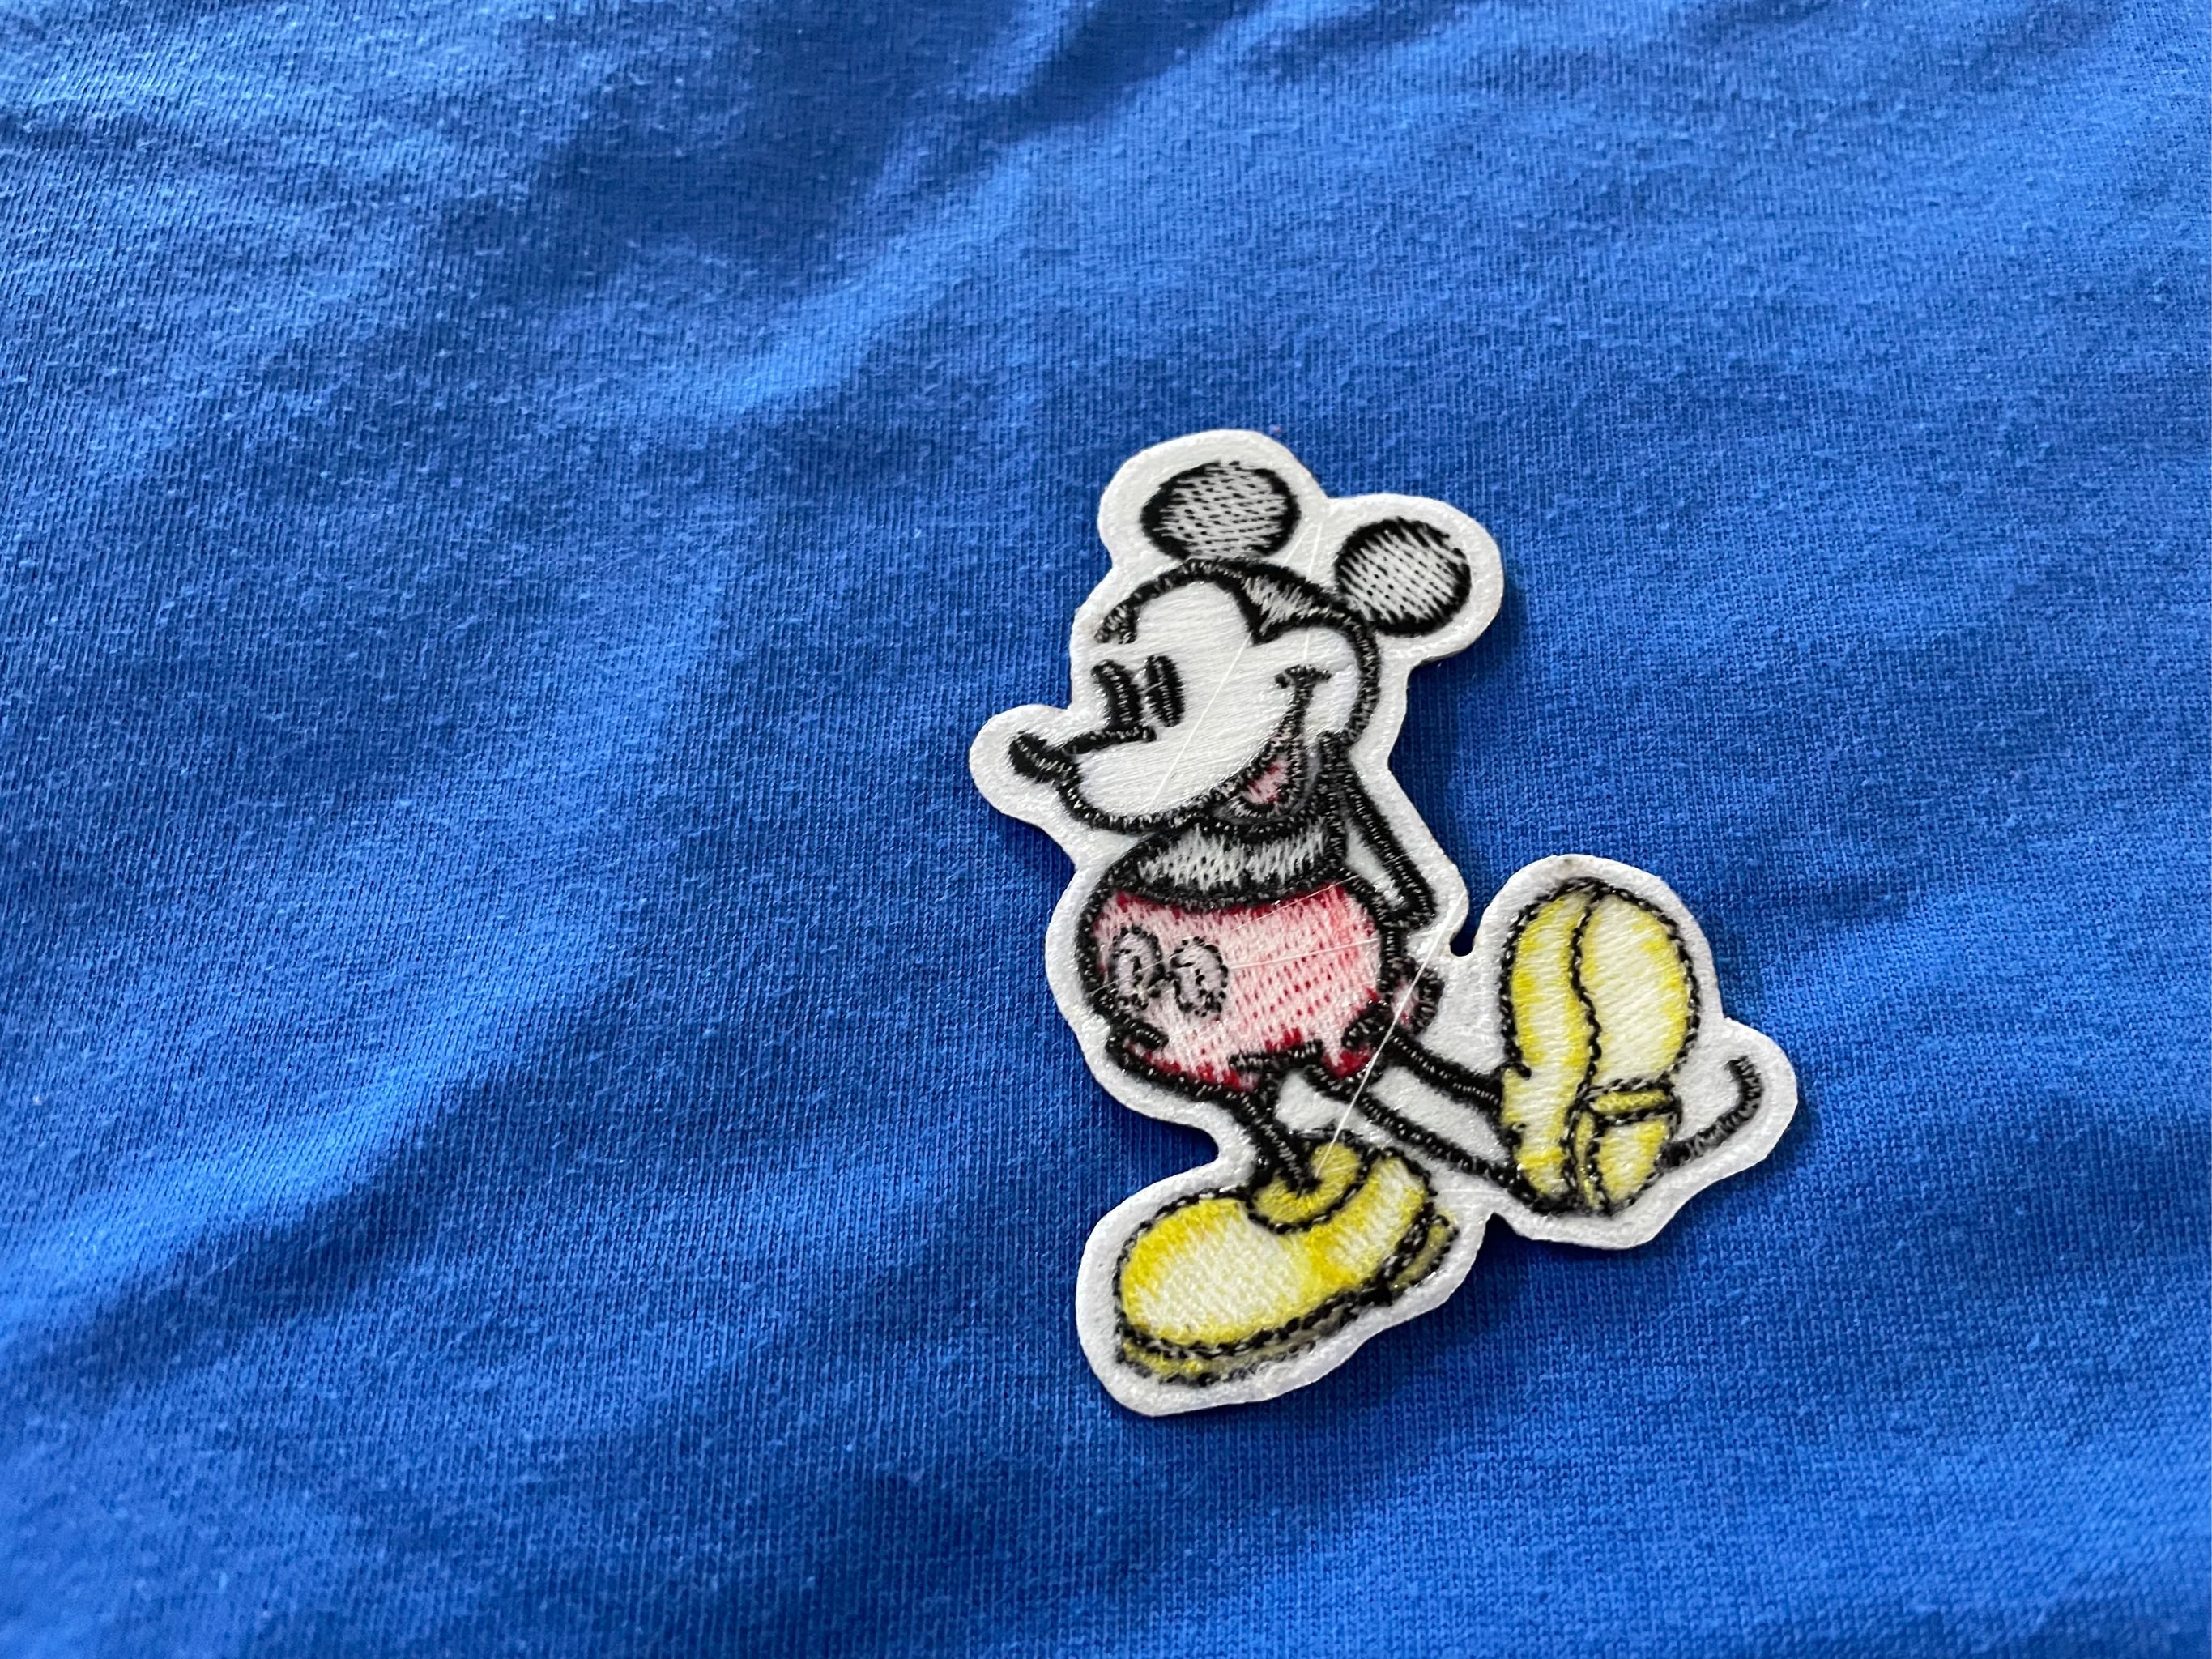  2Pcs Kids Cute Cartoon Mickey Iron On Patches for Clothing Sew  On/Iron On Applique Embroidered Patches for T-Shirt, Jackets, Jeans,  Vests,Hats, Backpacks : Arts, Crafts & Sewing